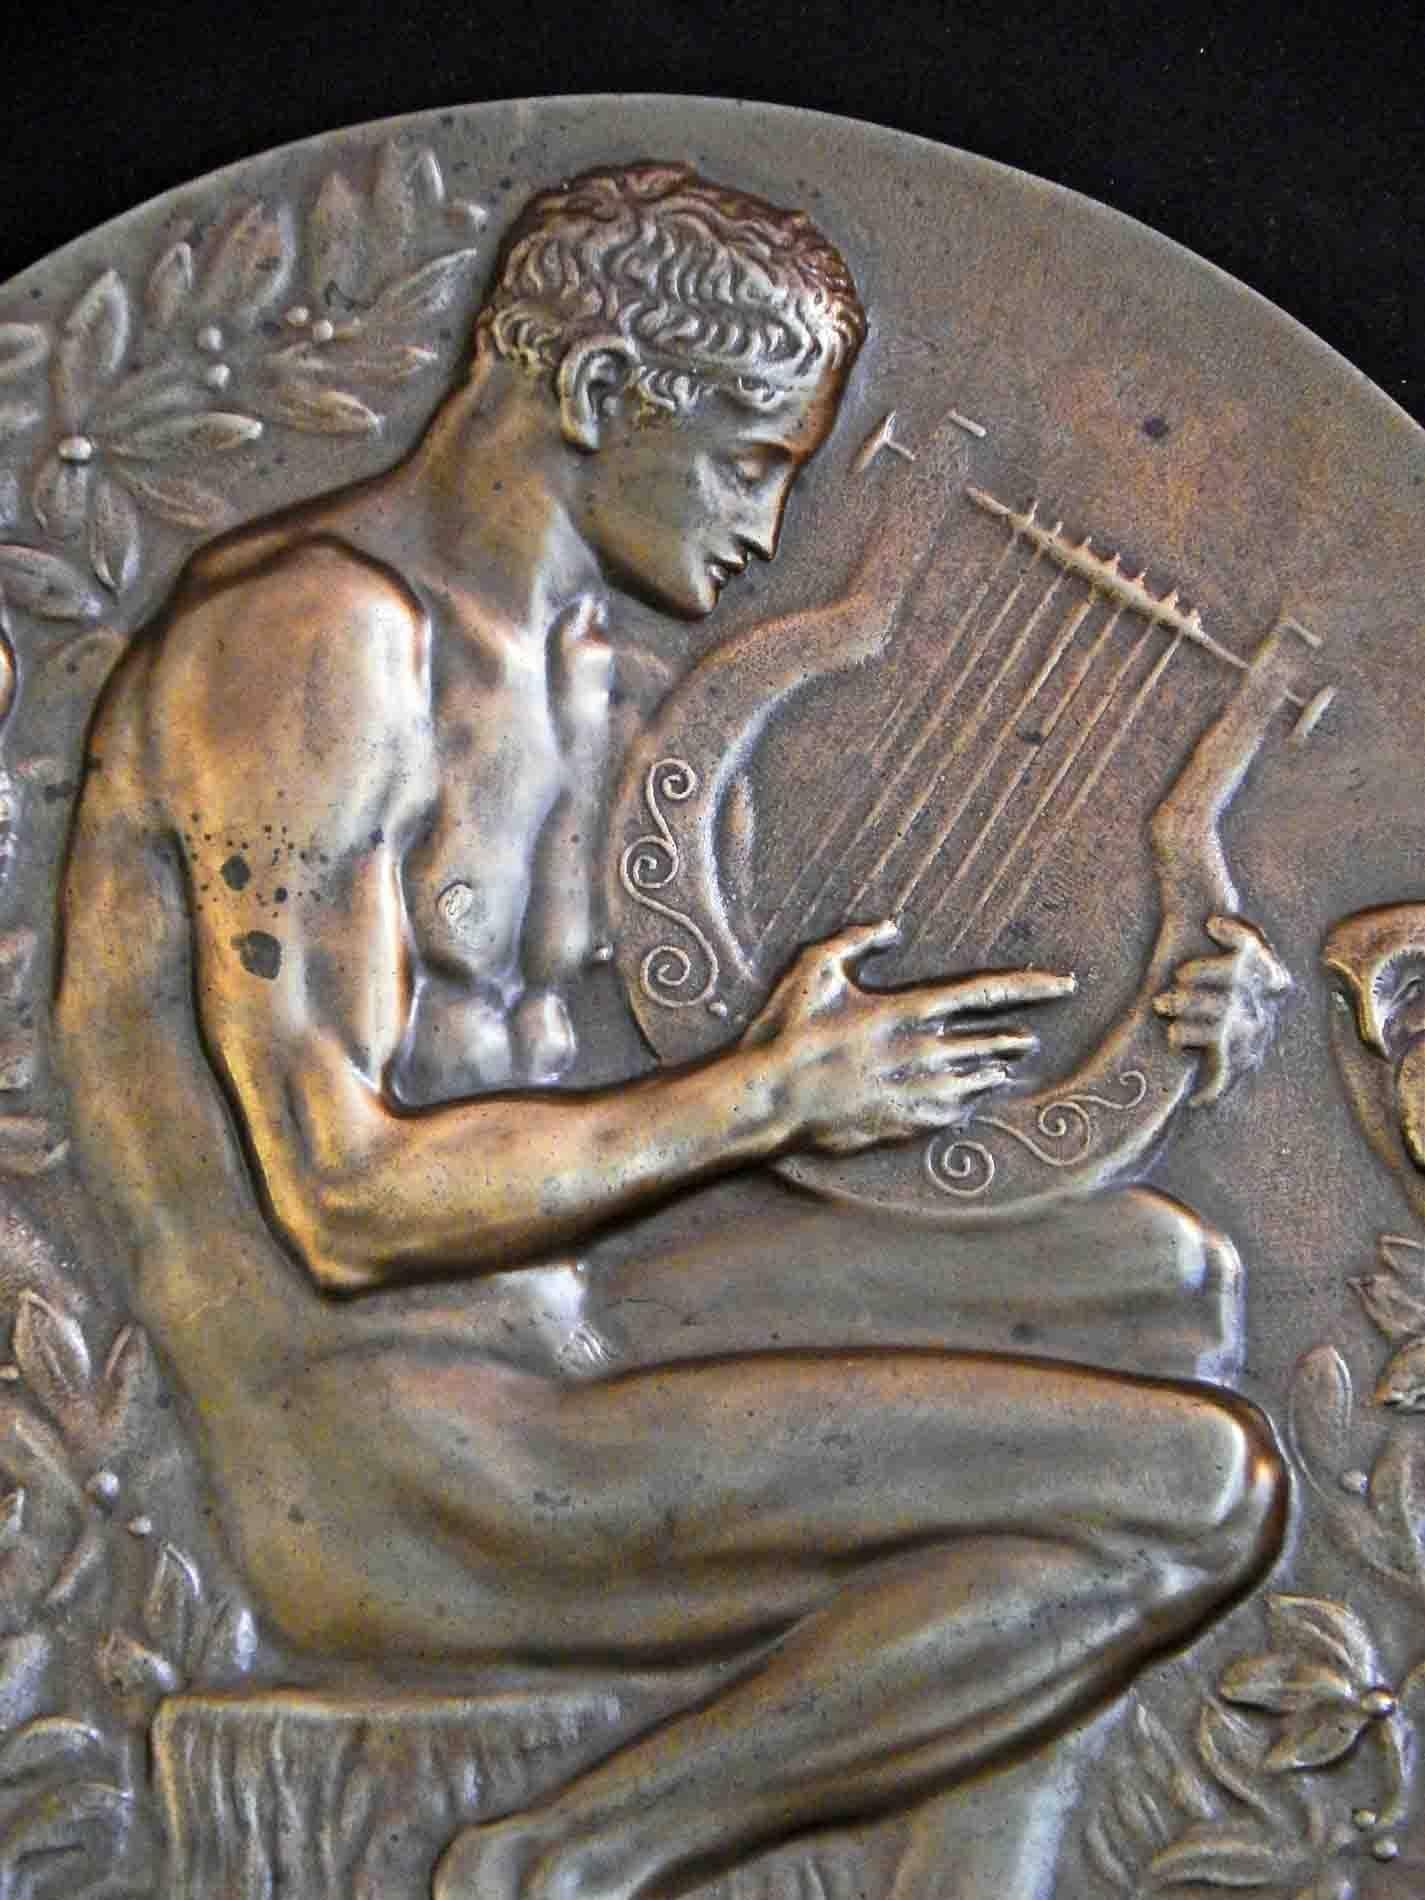 A modern interpretation of the ancient story that Orpheus played the lyre so sweetly and enchantingly that he charmed and calmed wild animals, this Art Deco bronze rondel shows Orpheus with owl and parrot. The nude male figure is beautifully